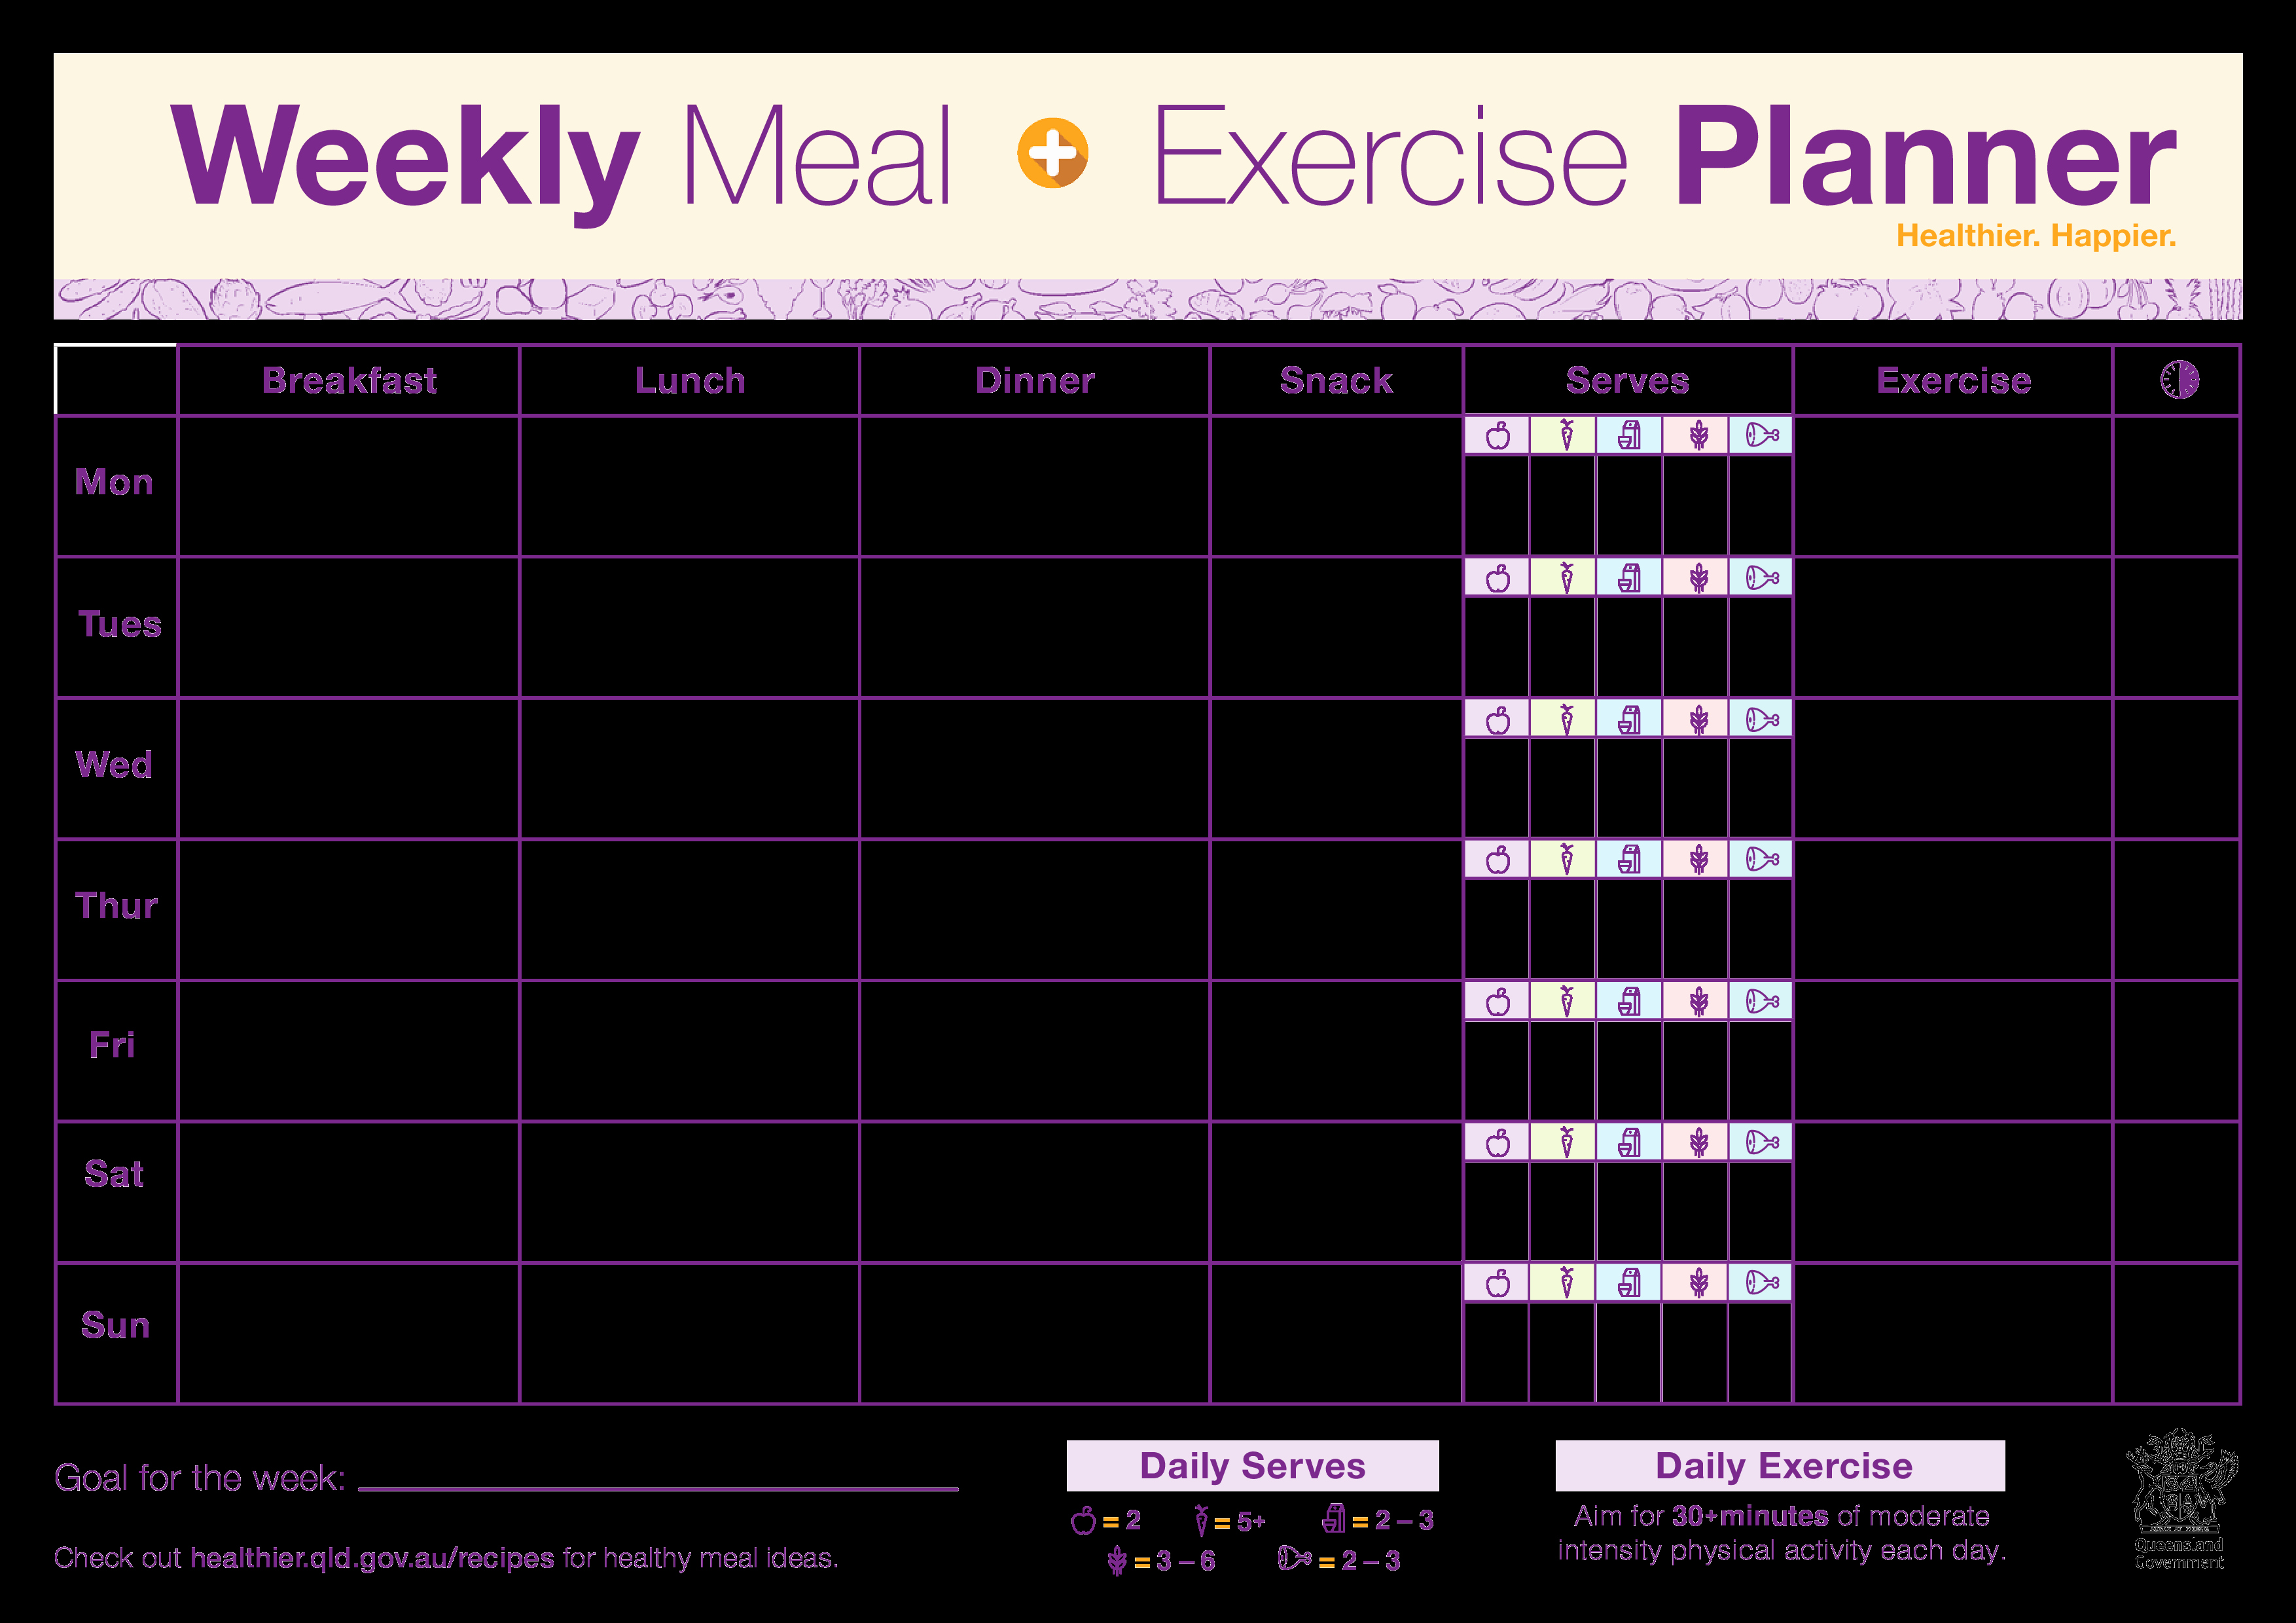 Weekly Workout Planner Template Beautiful Weekly Meal Exercise Planner